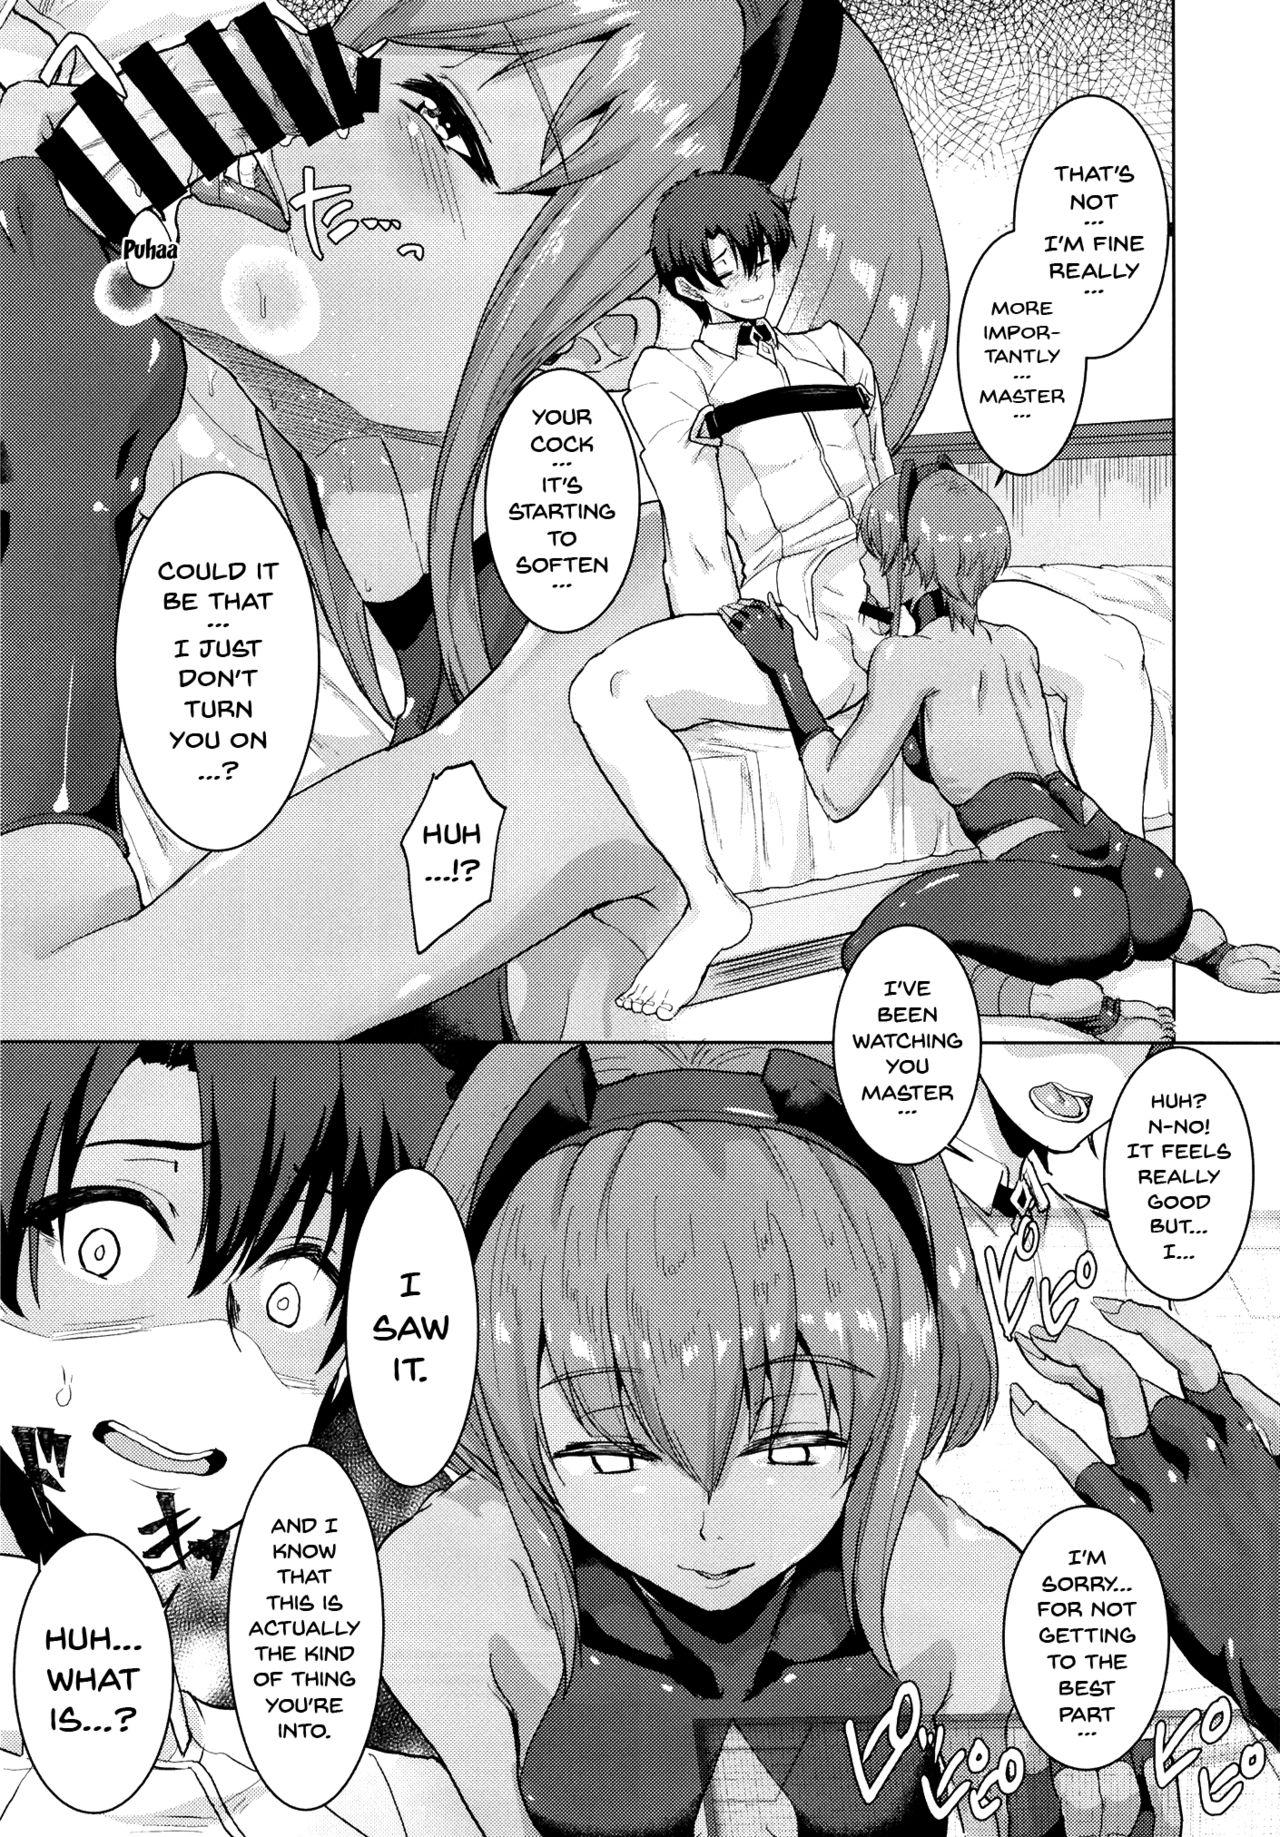 Dirty Ibitsuna Boku to Kanojo to - Fate grand order Free 18 Year Old Porn - Page 12